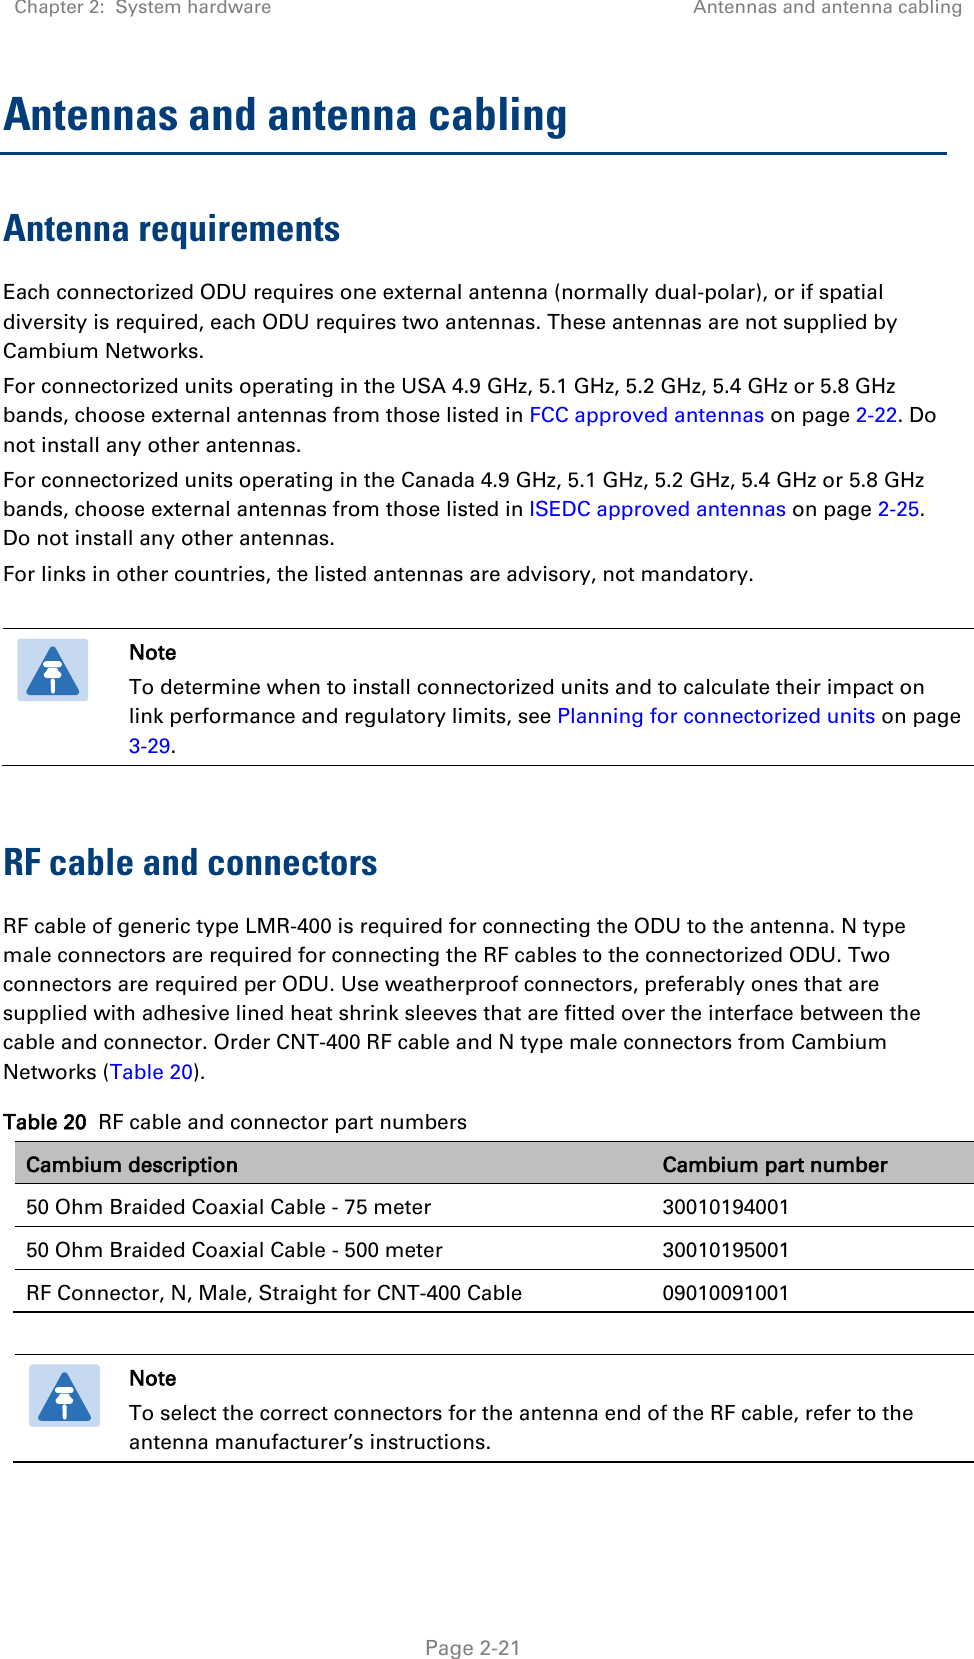 Chapter 2:  System hardware Antennas and antenna cabling   Page 2-21 Antennas and antenna cabling Antenna requirements Each connectorized ODU requires one external antenna (normally dual-polar), or if spatial diversity is required, each ODU requires two antennas. These antennas are not supplied by Cambium Networks. For connectorized units operating in the USA 4.9 GHz, 5.1 GHz, 5.2 GHz, 5.4 GHz or 5.8 GHz bands, choose external antennas from those listed in FCC approved antennas on page 2-22. Do not install any other antennas. For connectorized units operating in the Canada 4.9 GHz, 5.1 GHz, 5.2 GHz, 5.4 GHz or 5.8 GHz bands, choose external antennas from those listed in ISEDC approved antennas on page 2-25. Do not install any other antennas. For links in other countries, the listed antennas are advisory, not mandatory.   Note To determine when to install connectorized units and to calculate their impact on link performance and regulatory limits, see Planning for connectorized units on page 3-29.  RF cable and connectors RF cable of generic type LMR-400 is required for connecting the ODU to the antenna. N type male connectors are required for connecting the RF cables to the connectorized ODU. Two connectors are required per ODU. Use weatherproof connectors, preferably ones that are supplied with adhesive lined heat shrink sleeves that are fitted over the interface between the cable and connector. Order CNT-400 RF cable and N type male connectors from Cambium Networks (Table 20). Table 20  RF cable and connector part numbers Cambium description Cambium part number 50 Ohm Braided Coaxial Cable - 75 meter 30010194001 50 Ohm Braided Coaxial Cable - 500 meter 30010195001 RF Connector, N, Male, Straight for CNT-400 Cable 09010091001   Note To select the correct connectors for the antenna end of the RF cable, refer to the antenna manufacturer’s instructions.  